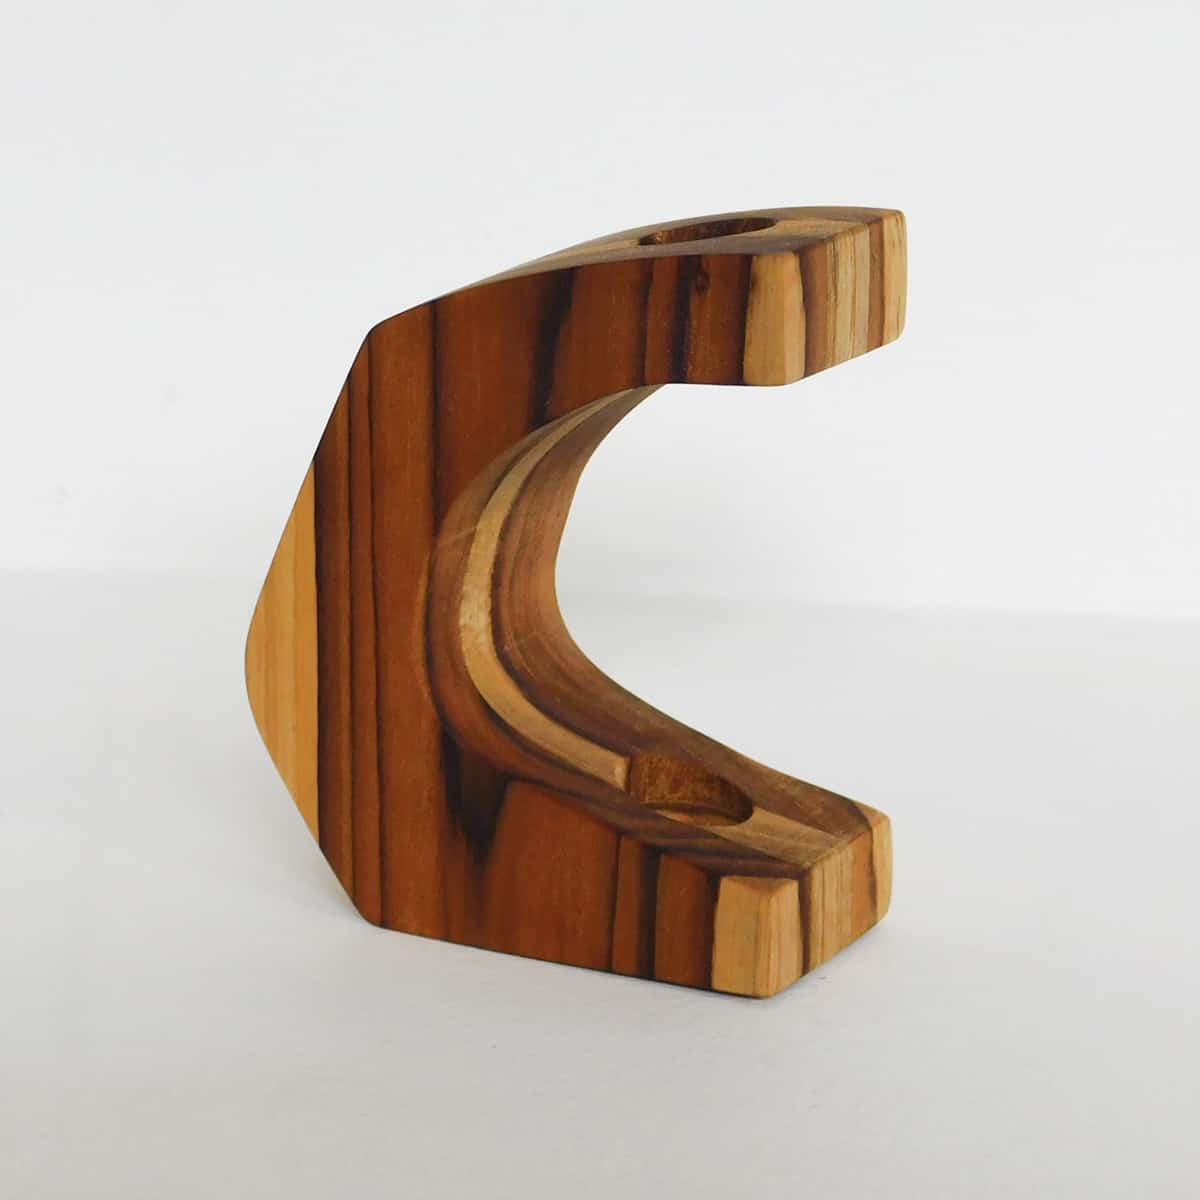  teak frame in the shape of the letter c with space for one tube vase on a white background